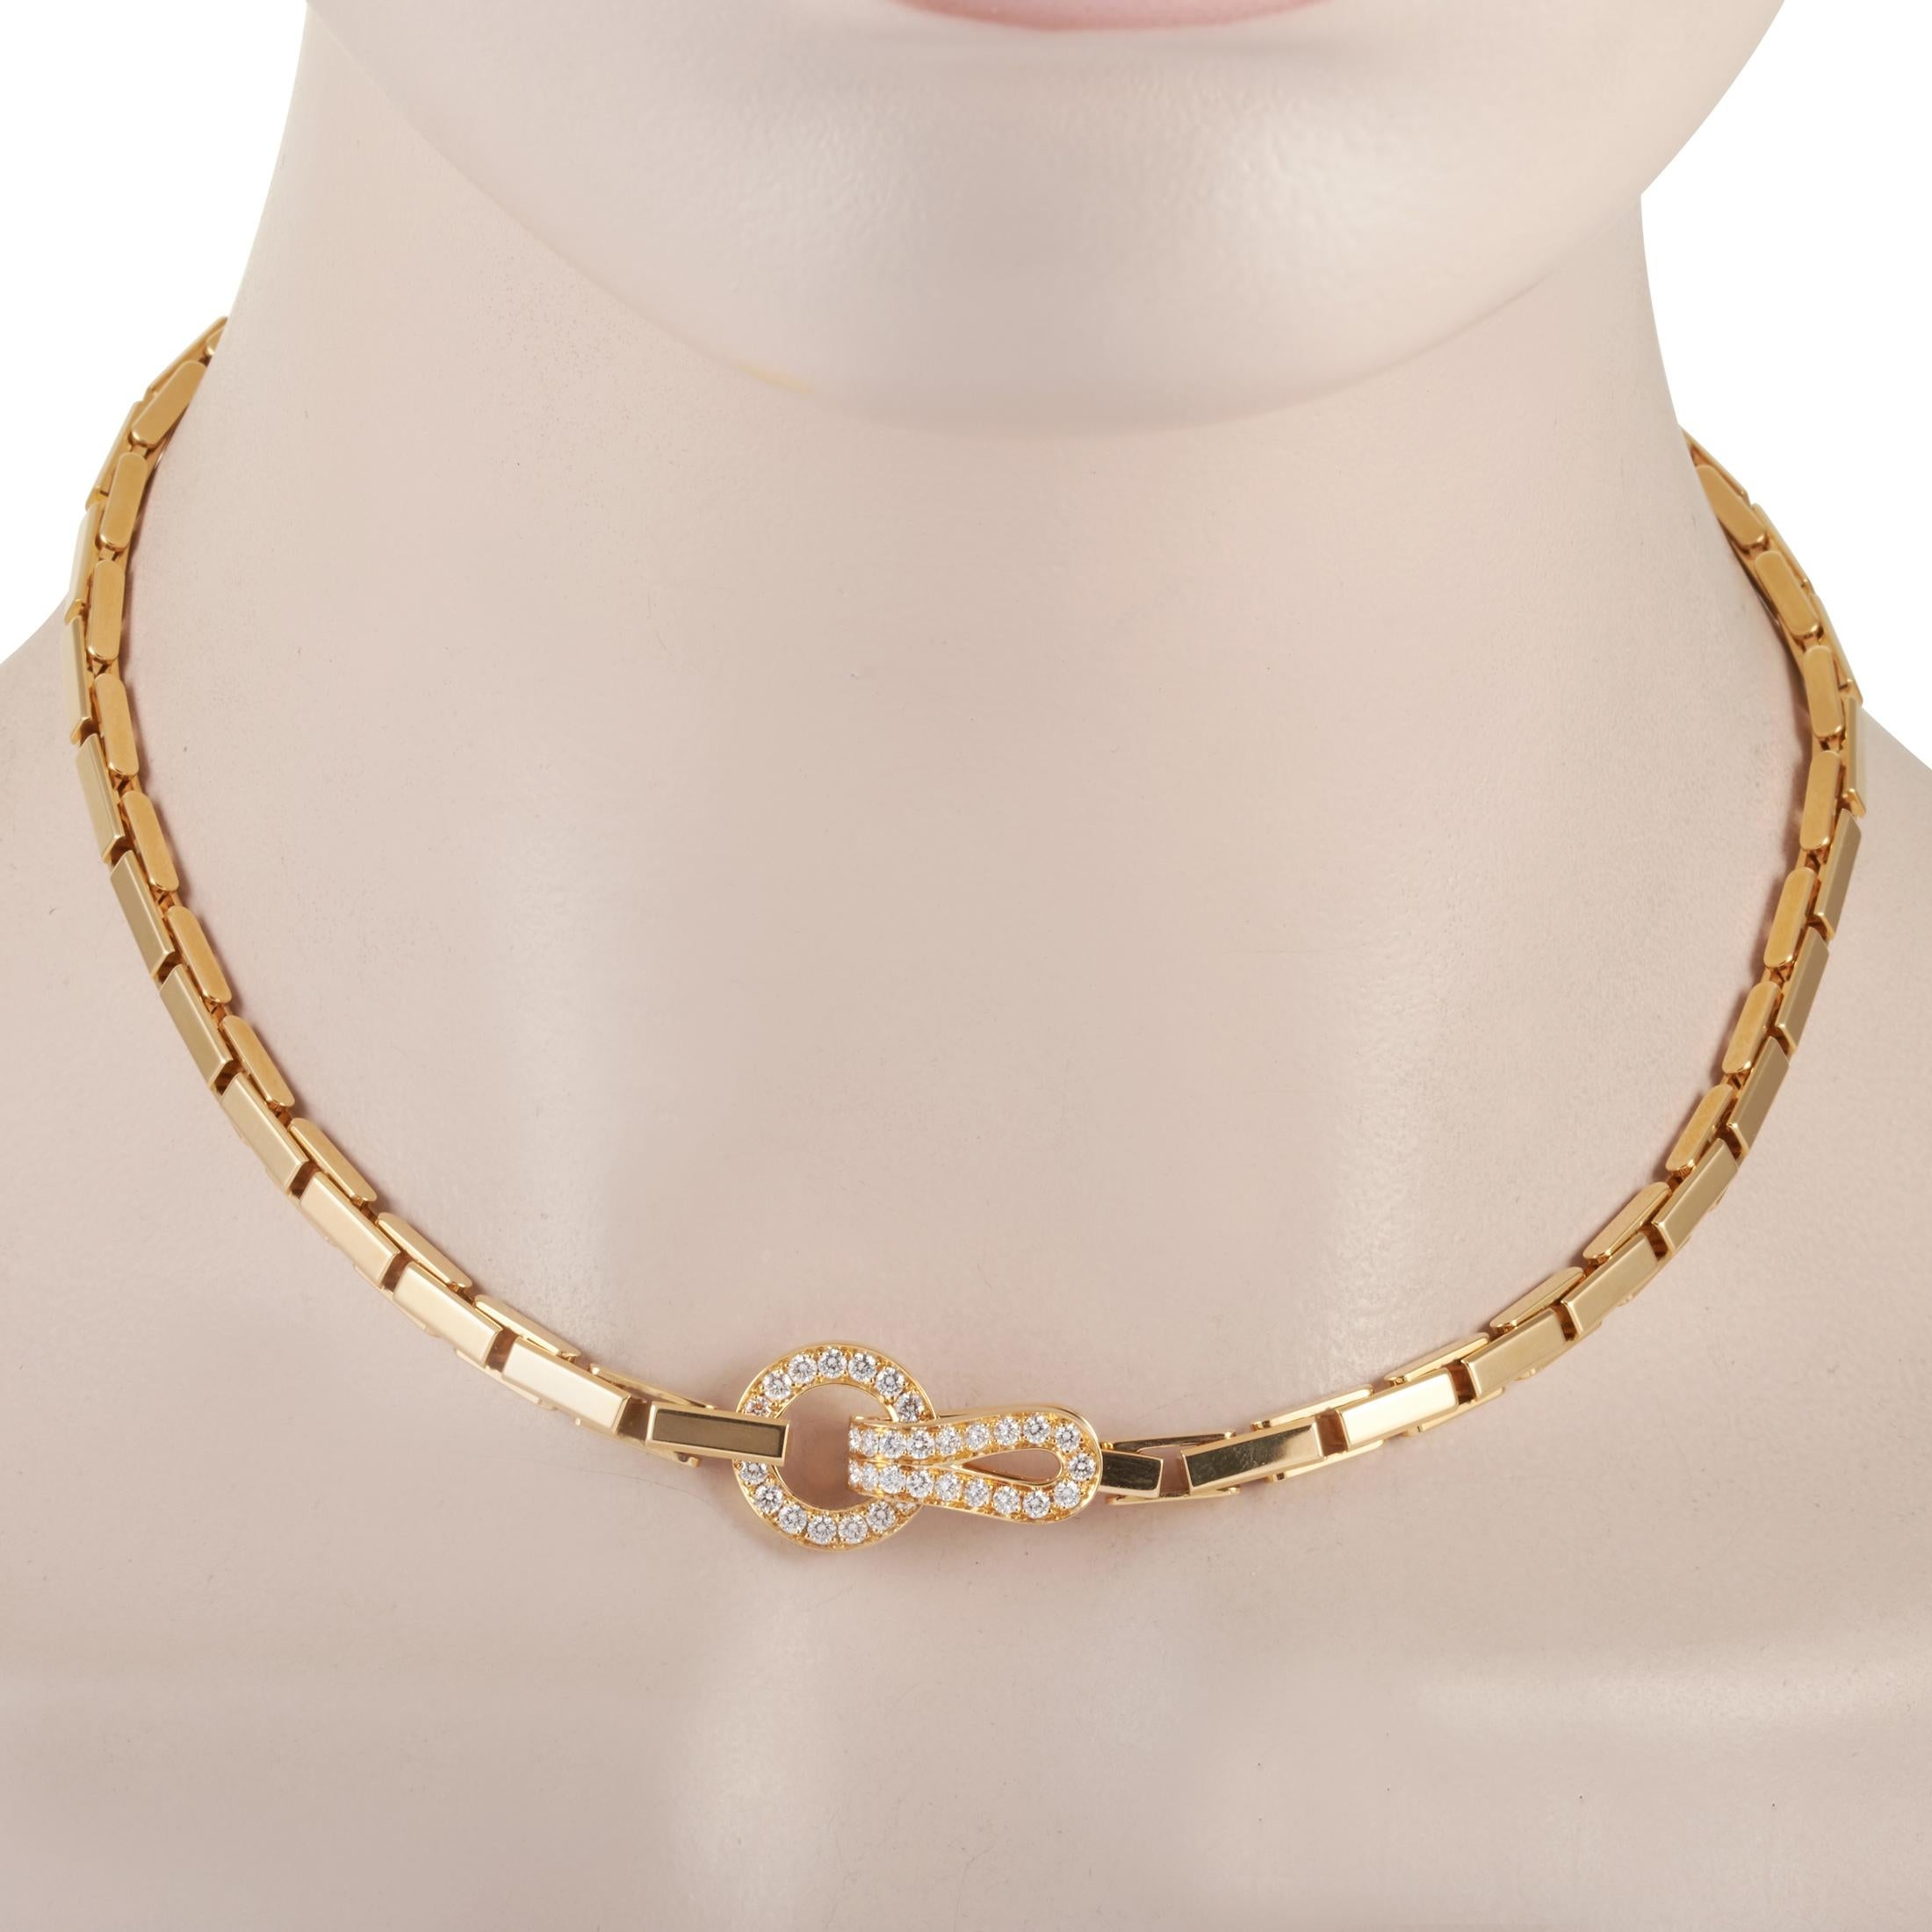 The Cartier “Agrafe” necklace is made of 18K yellow gold and embellished with diamonds. The necklace weighs 66.3 grams and measures 14.50” in length.
 
 This jewelry piece is offered in estate condition and includes the manufacturer’s box.